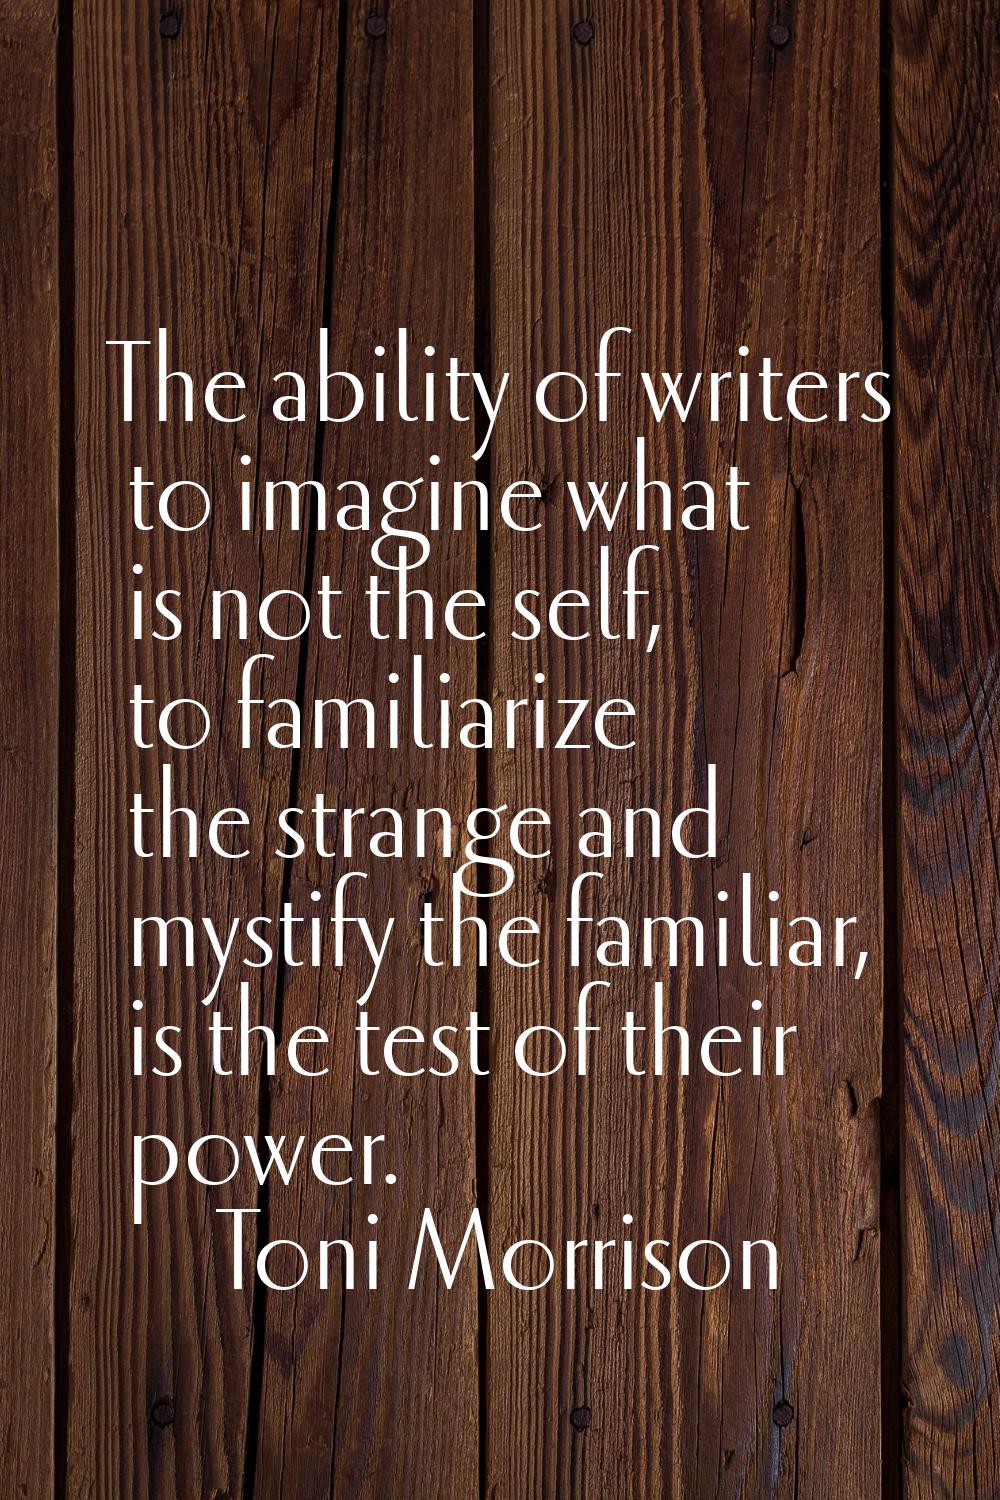 The ability of writers to imagine what is not the self, to familiarize the strange and mystify the 